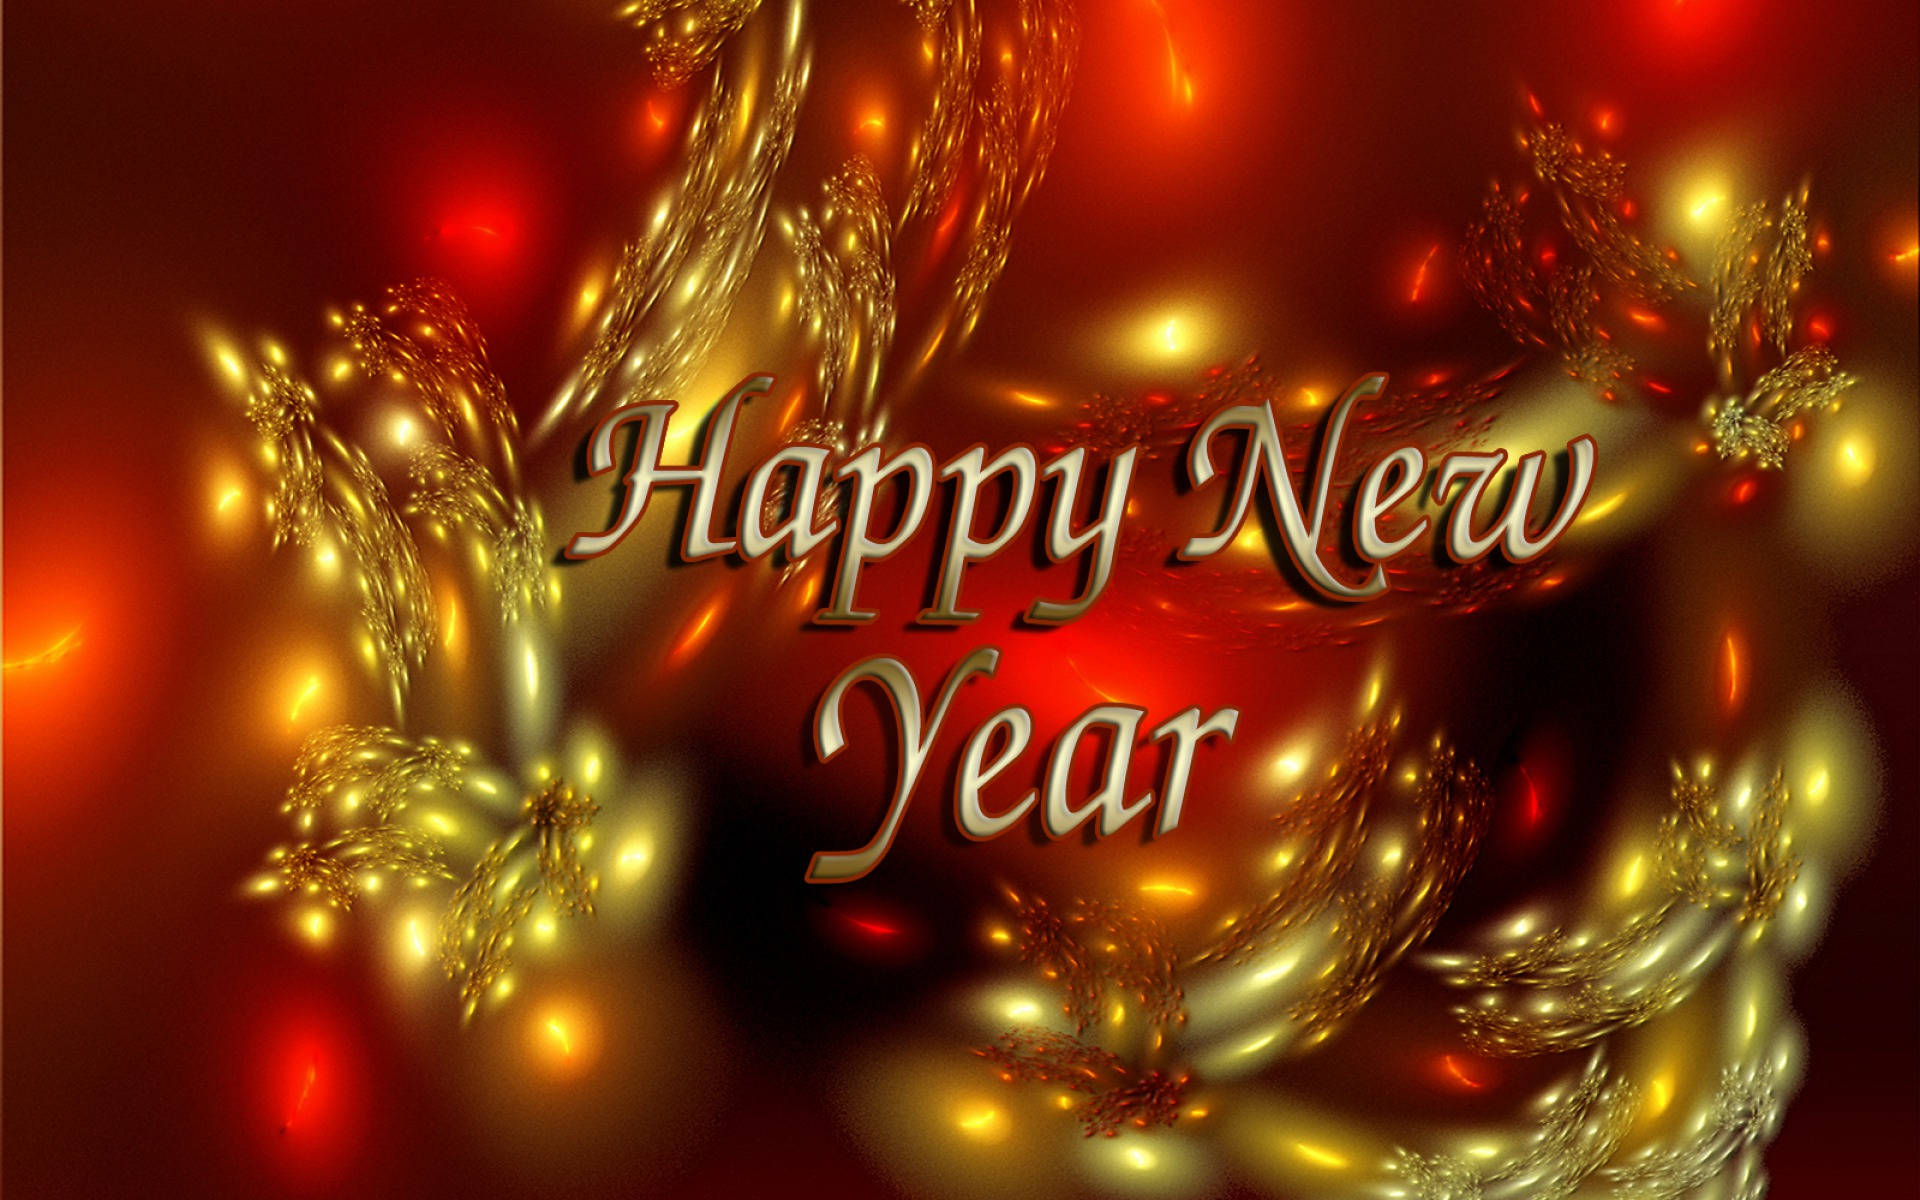 Happy New Year Greetings On Red Background